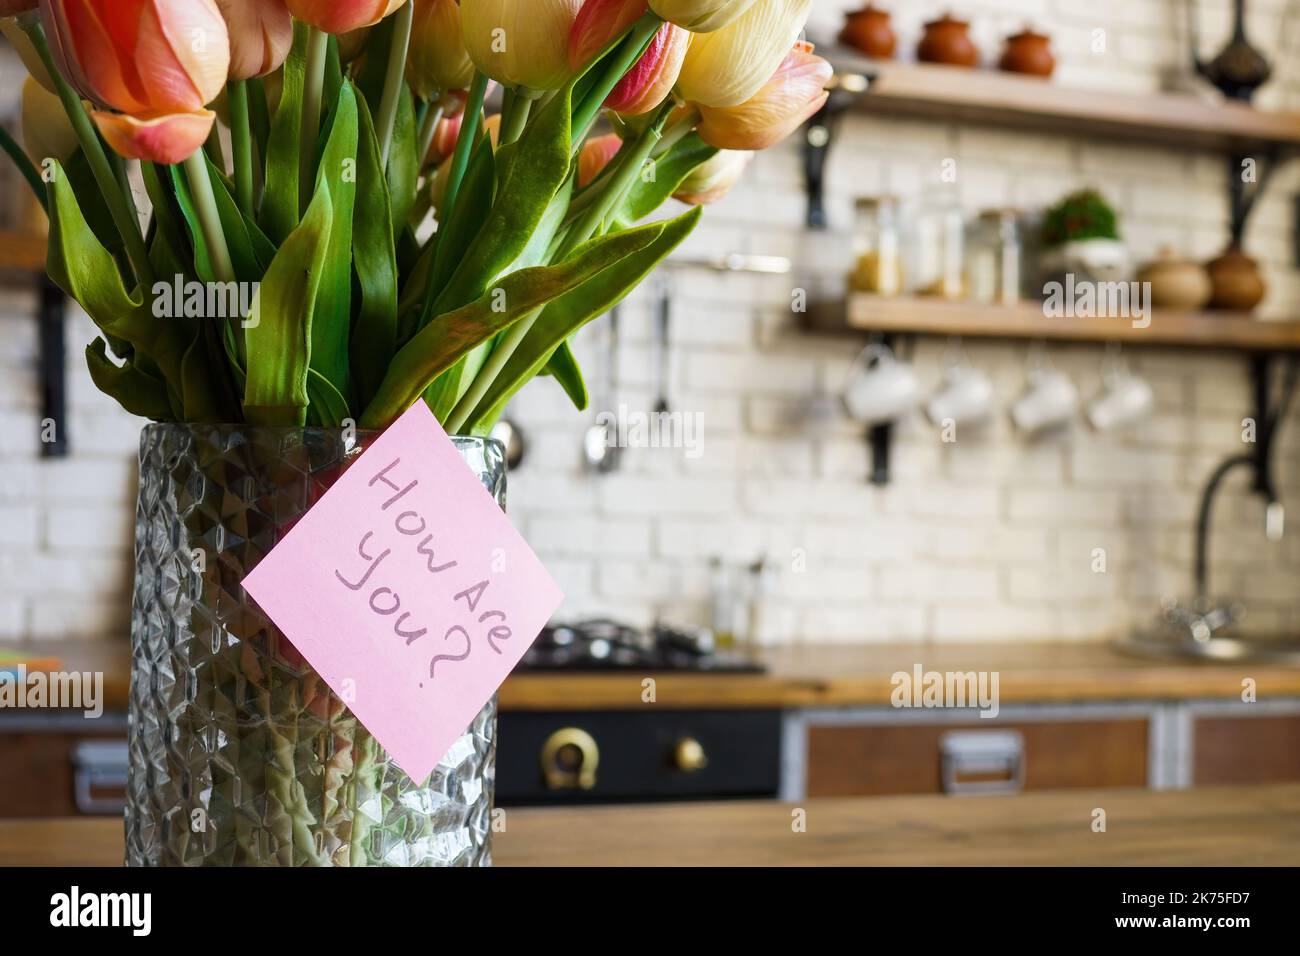 Vase with flowers at home and sticker with How are you question. Stock Photo